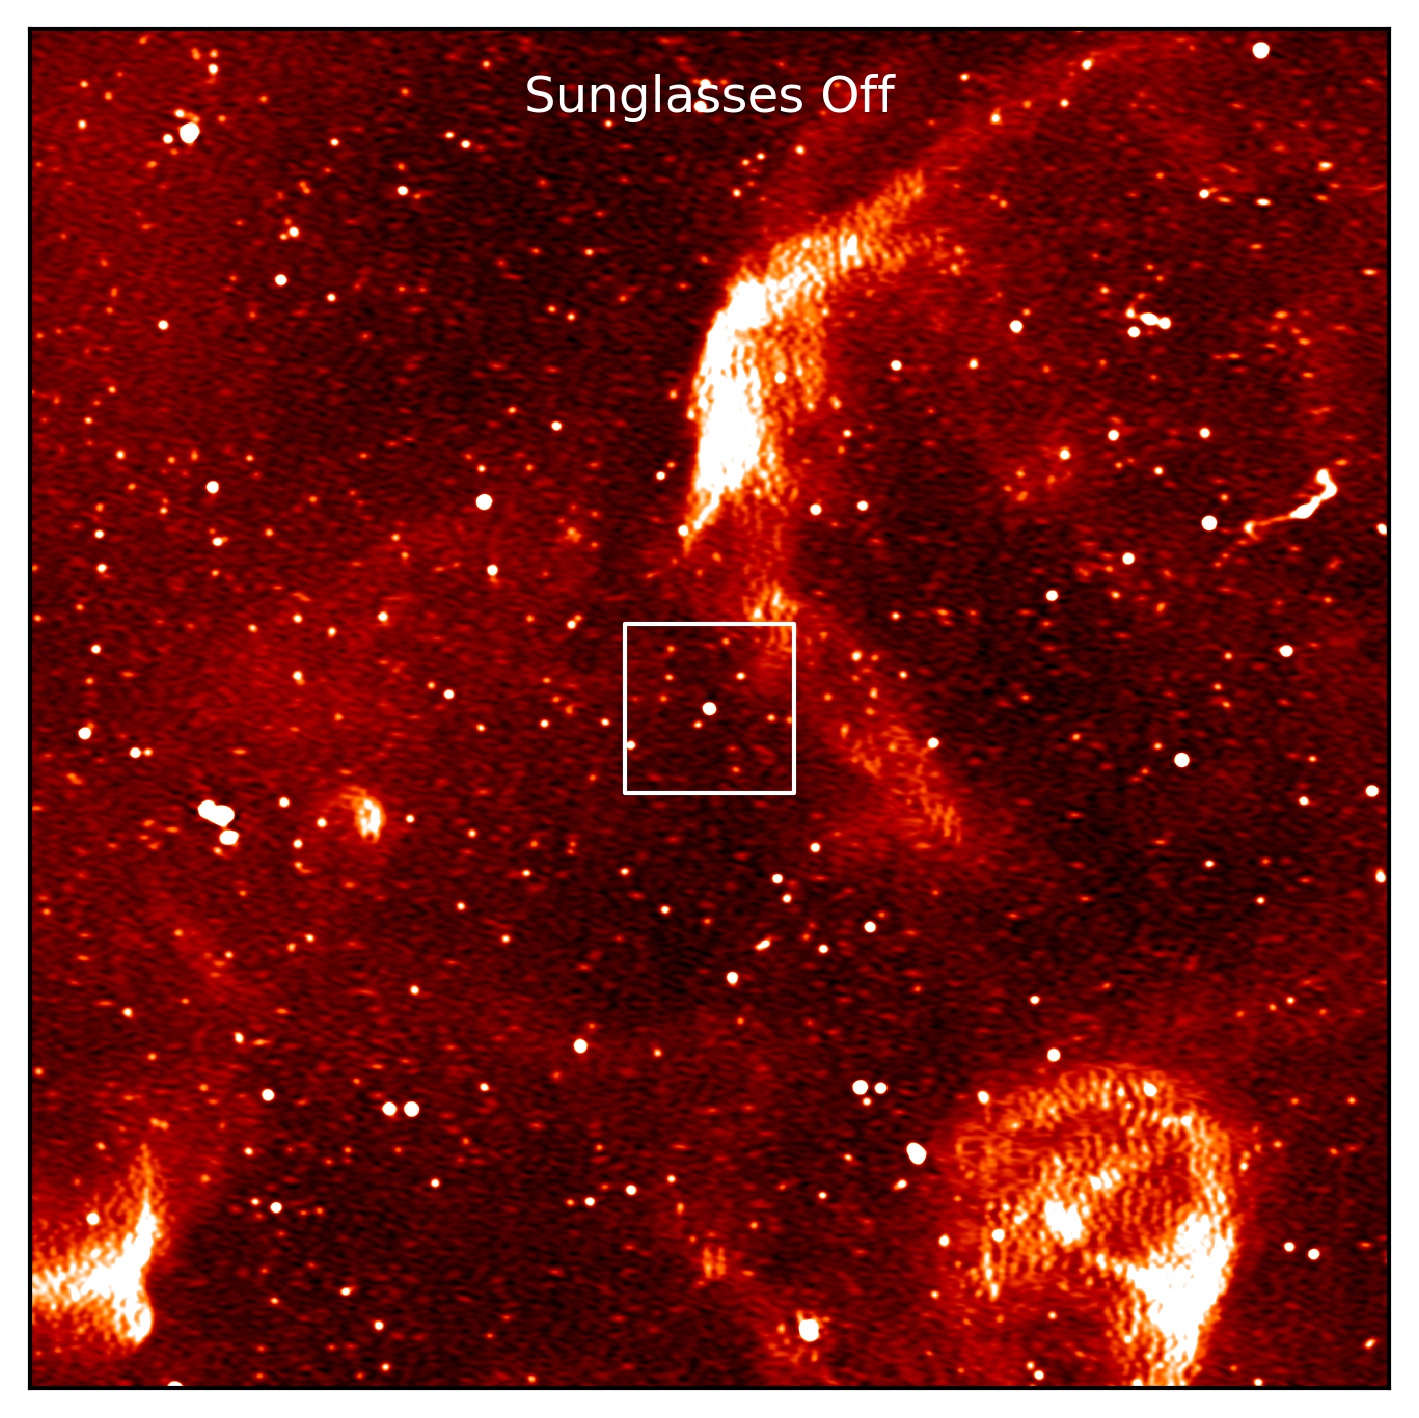 MeerKAT radio telescope field of view without'sunglasses' features new pulsar